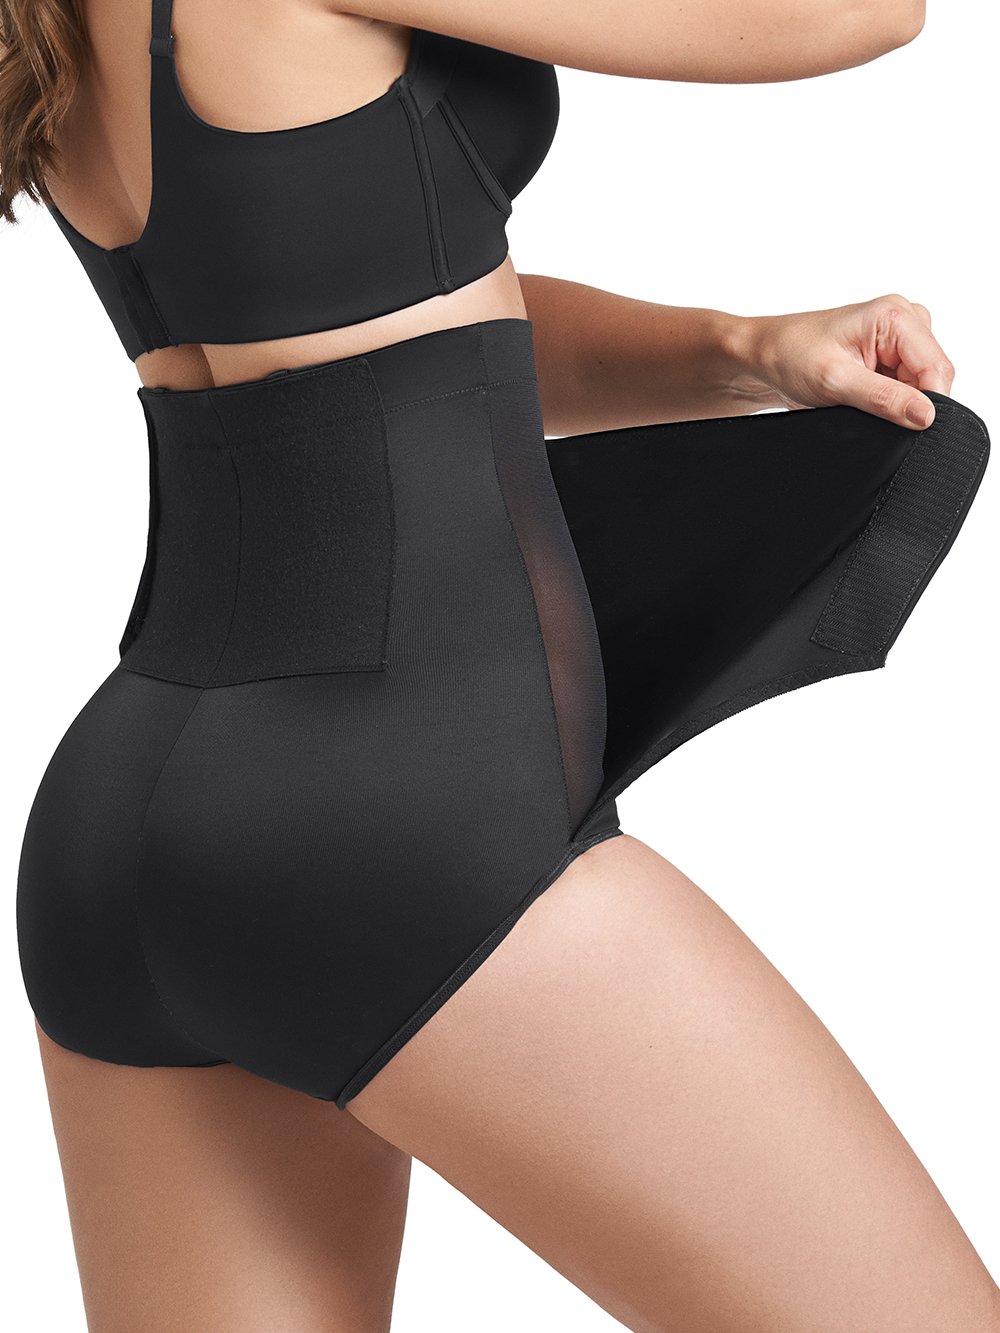 Leonisa Shapewear Black / S High-Waisted Postpartum Belly Wrap Firm Compression Panty